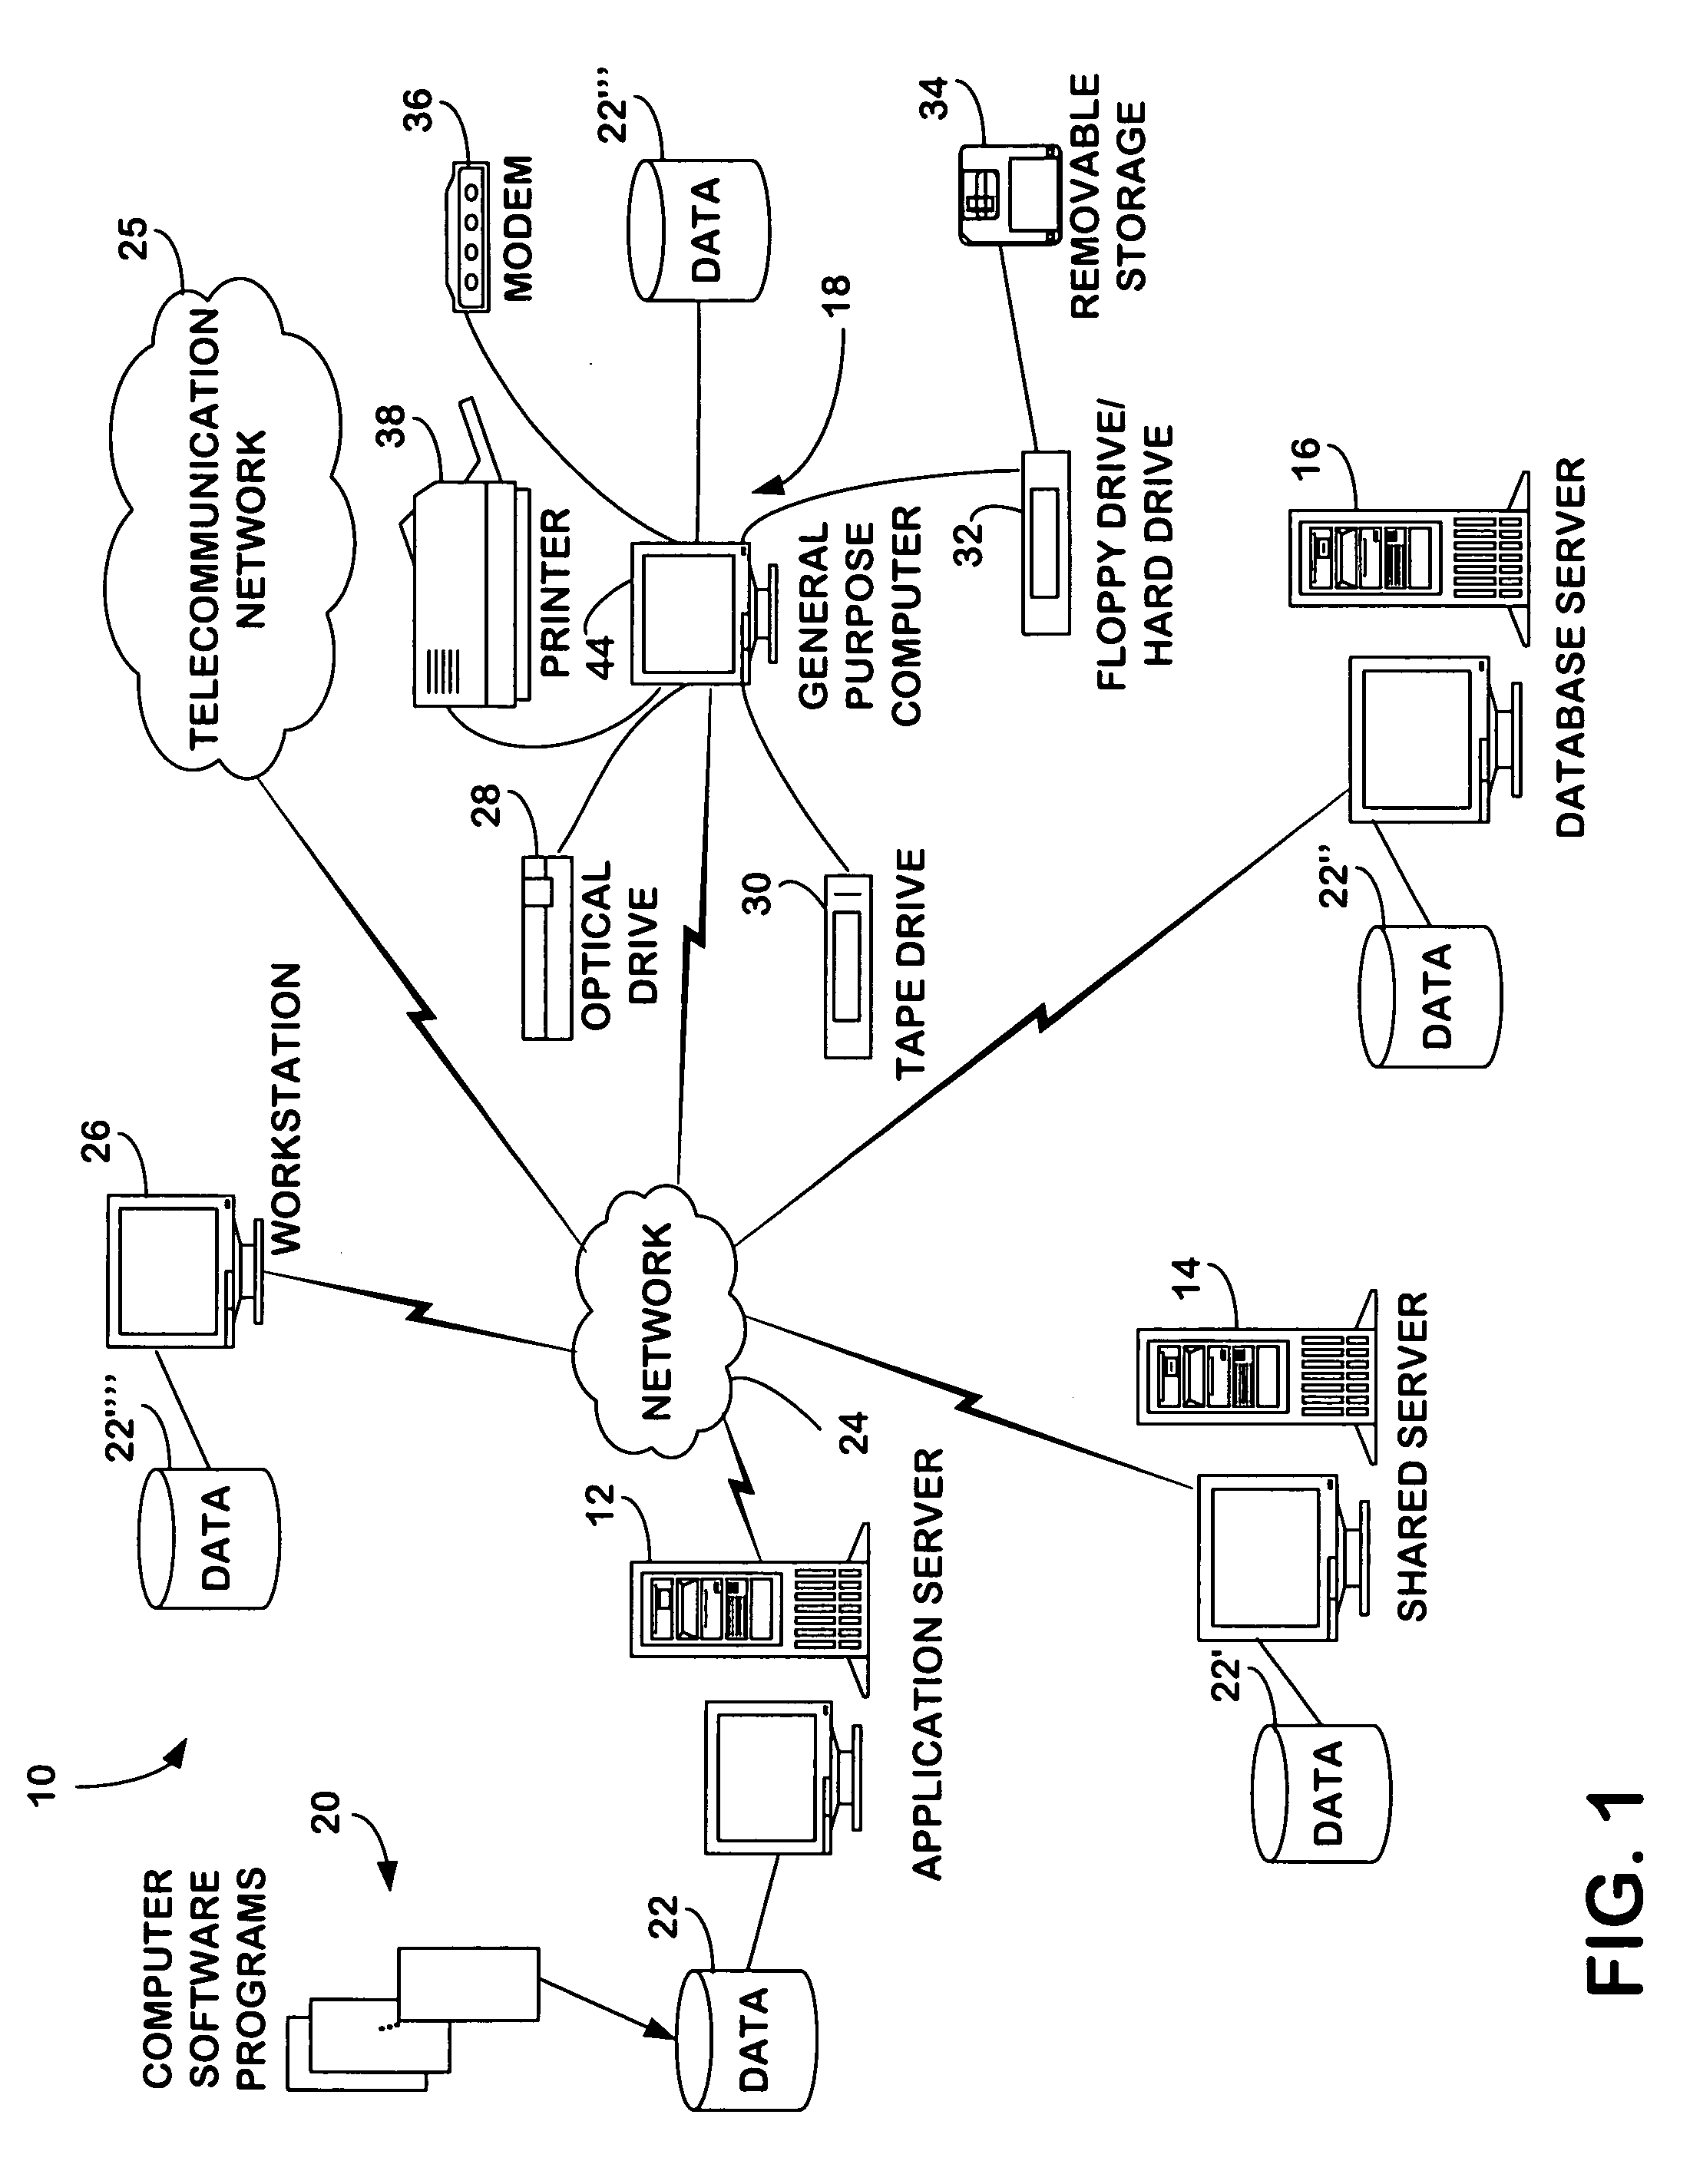 System, method and apparatus for maintaining cellular telephone network site information